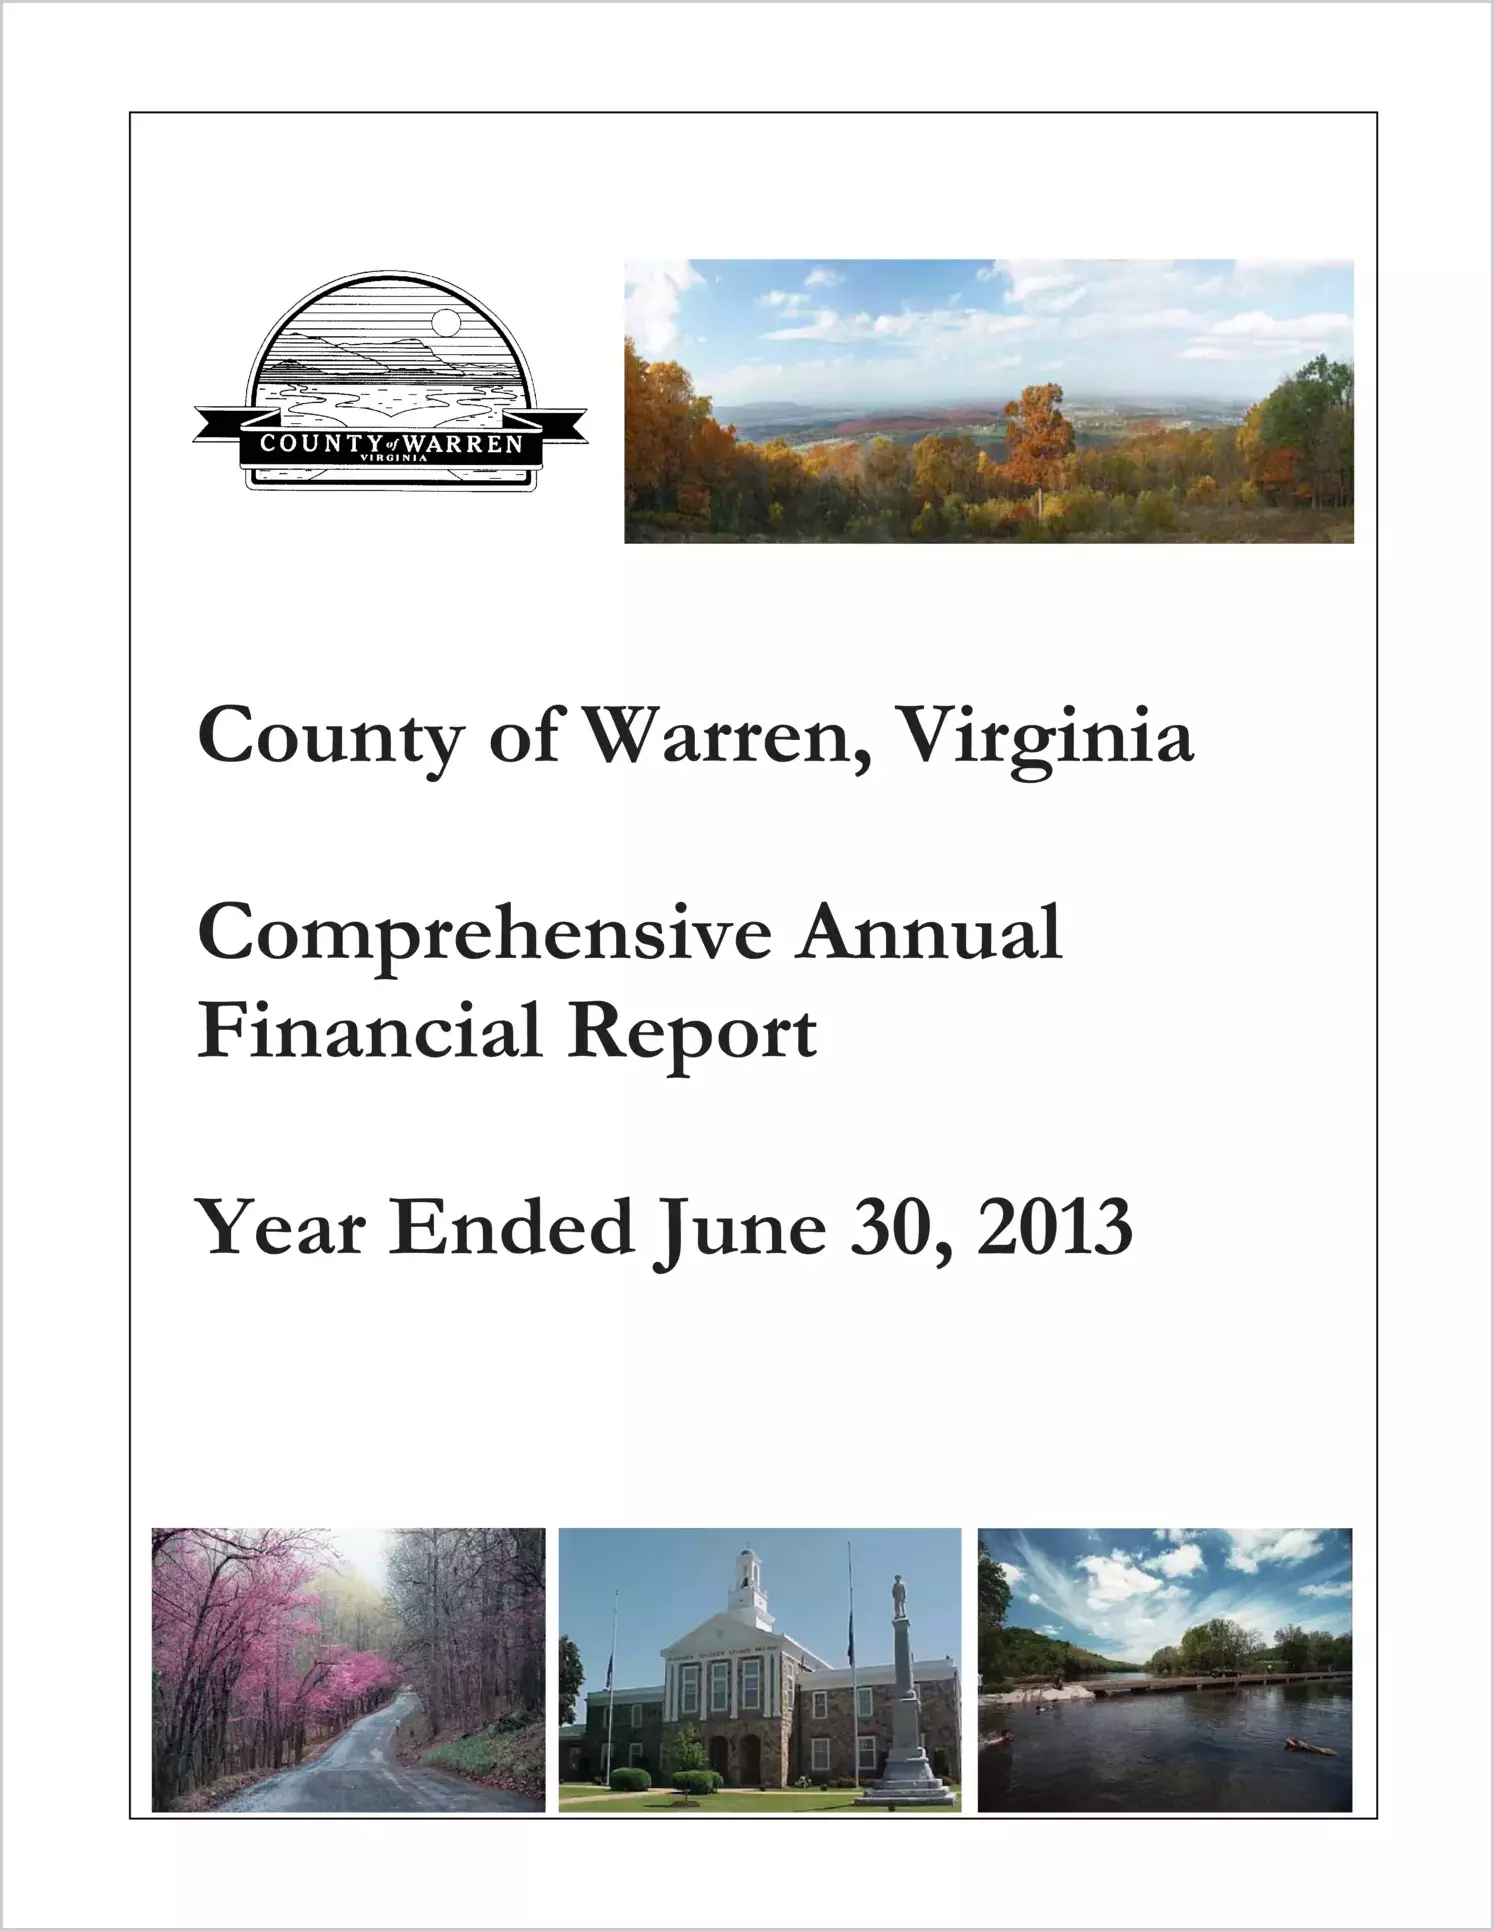 2013 Annual Financial Report for County of Warren